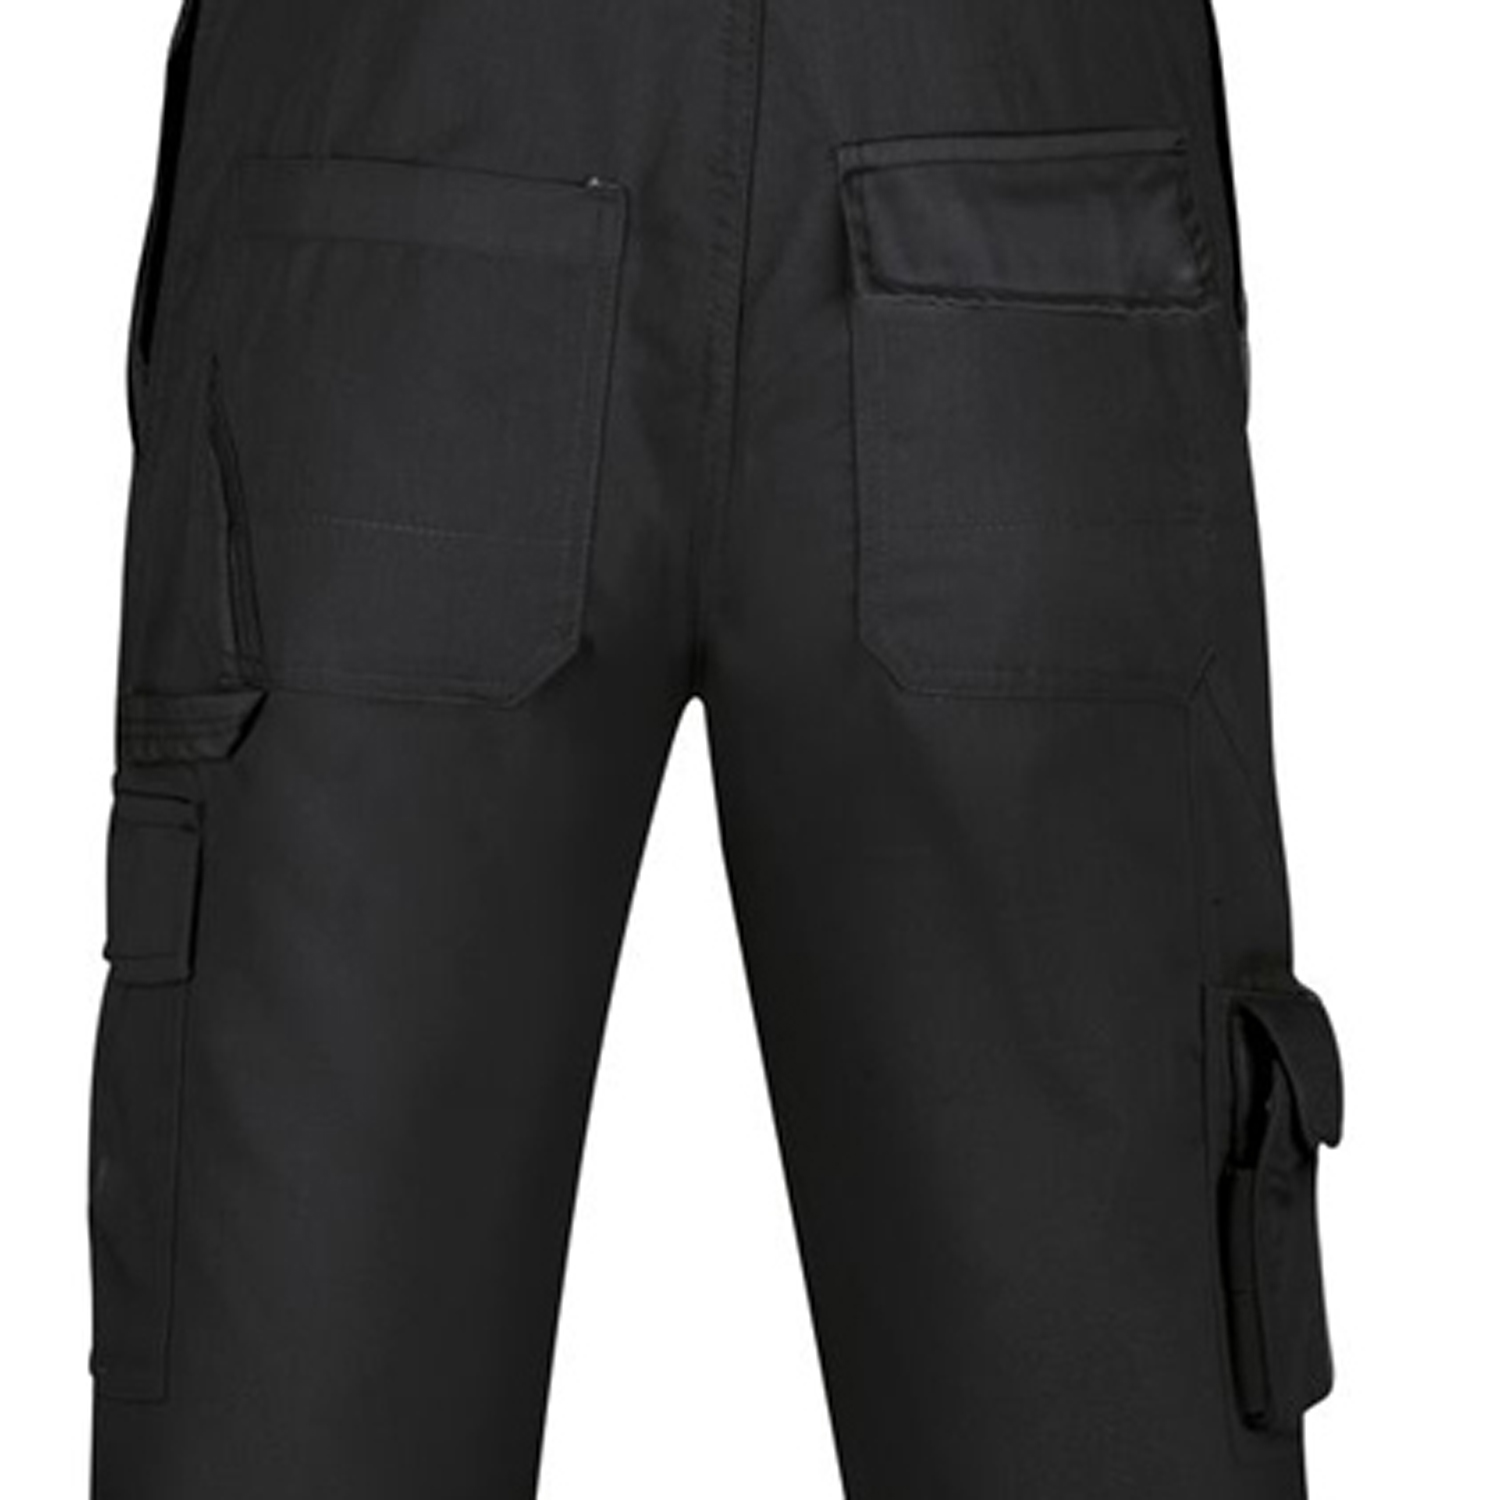 Workingclothes, Pants by PKA Klöcker in black, large sizes up to 74